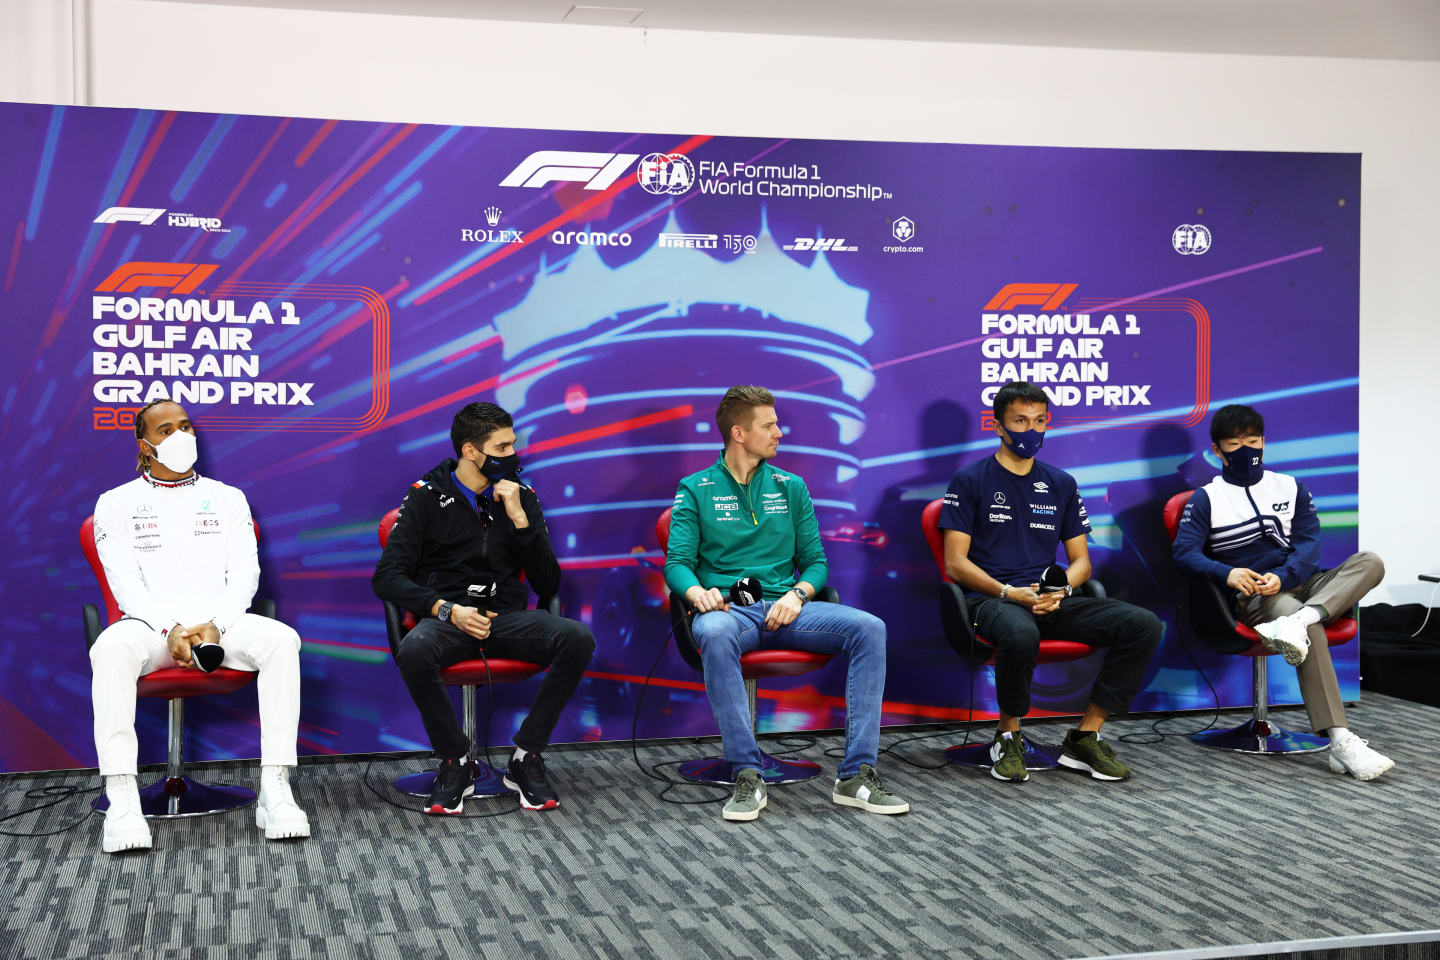 BAHRAIN, BAHRAIN - MARCH 18: (L-R) Lewis Hamilton of Great Britain and Mercedes, Esteban Ocon of France and Alpine F1, Nico Hulkenberg of Germany driving the (27) Aston Martin AMR22 Mercedes[, Alexander Albon of Thailand and Williams and Yuki Tsunoda of Japan and Scuderia AlphaTauri attend the Drivers Press Conference before practice ahead of the F1 Grand Prix of Bahrain at Bahrain International Circuit on March 18, 2022 in Bahrain, Bahrain. (Photo by Lars Baron/Getty Images)